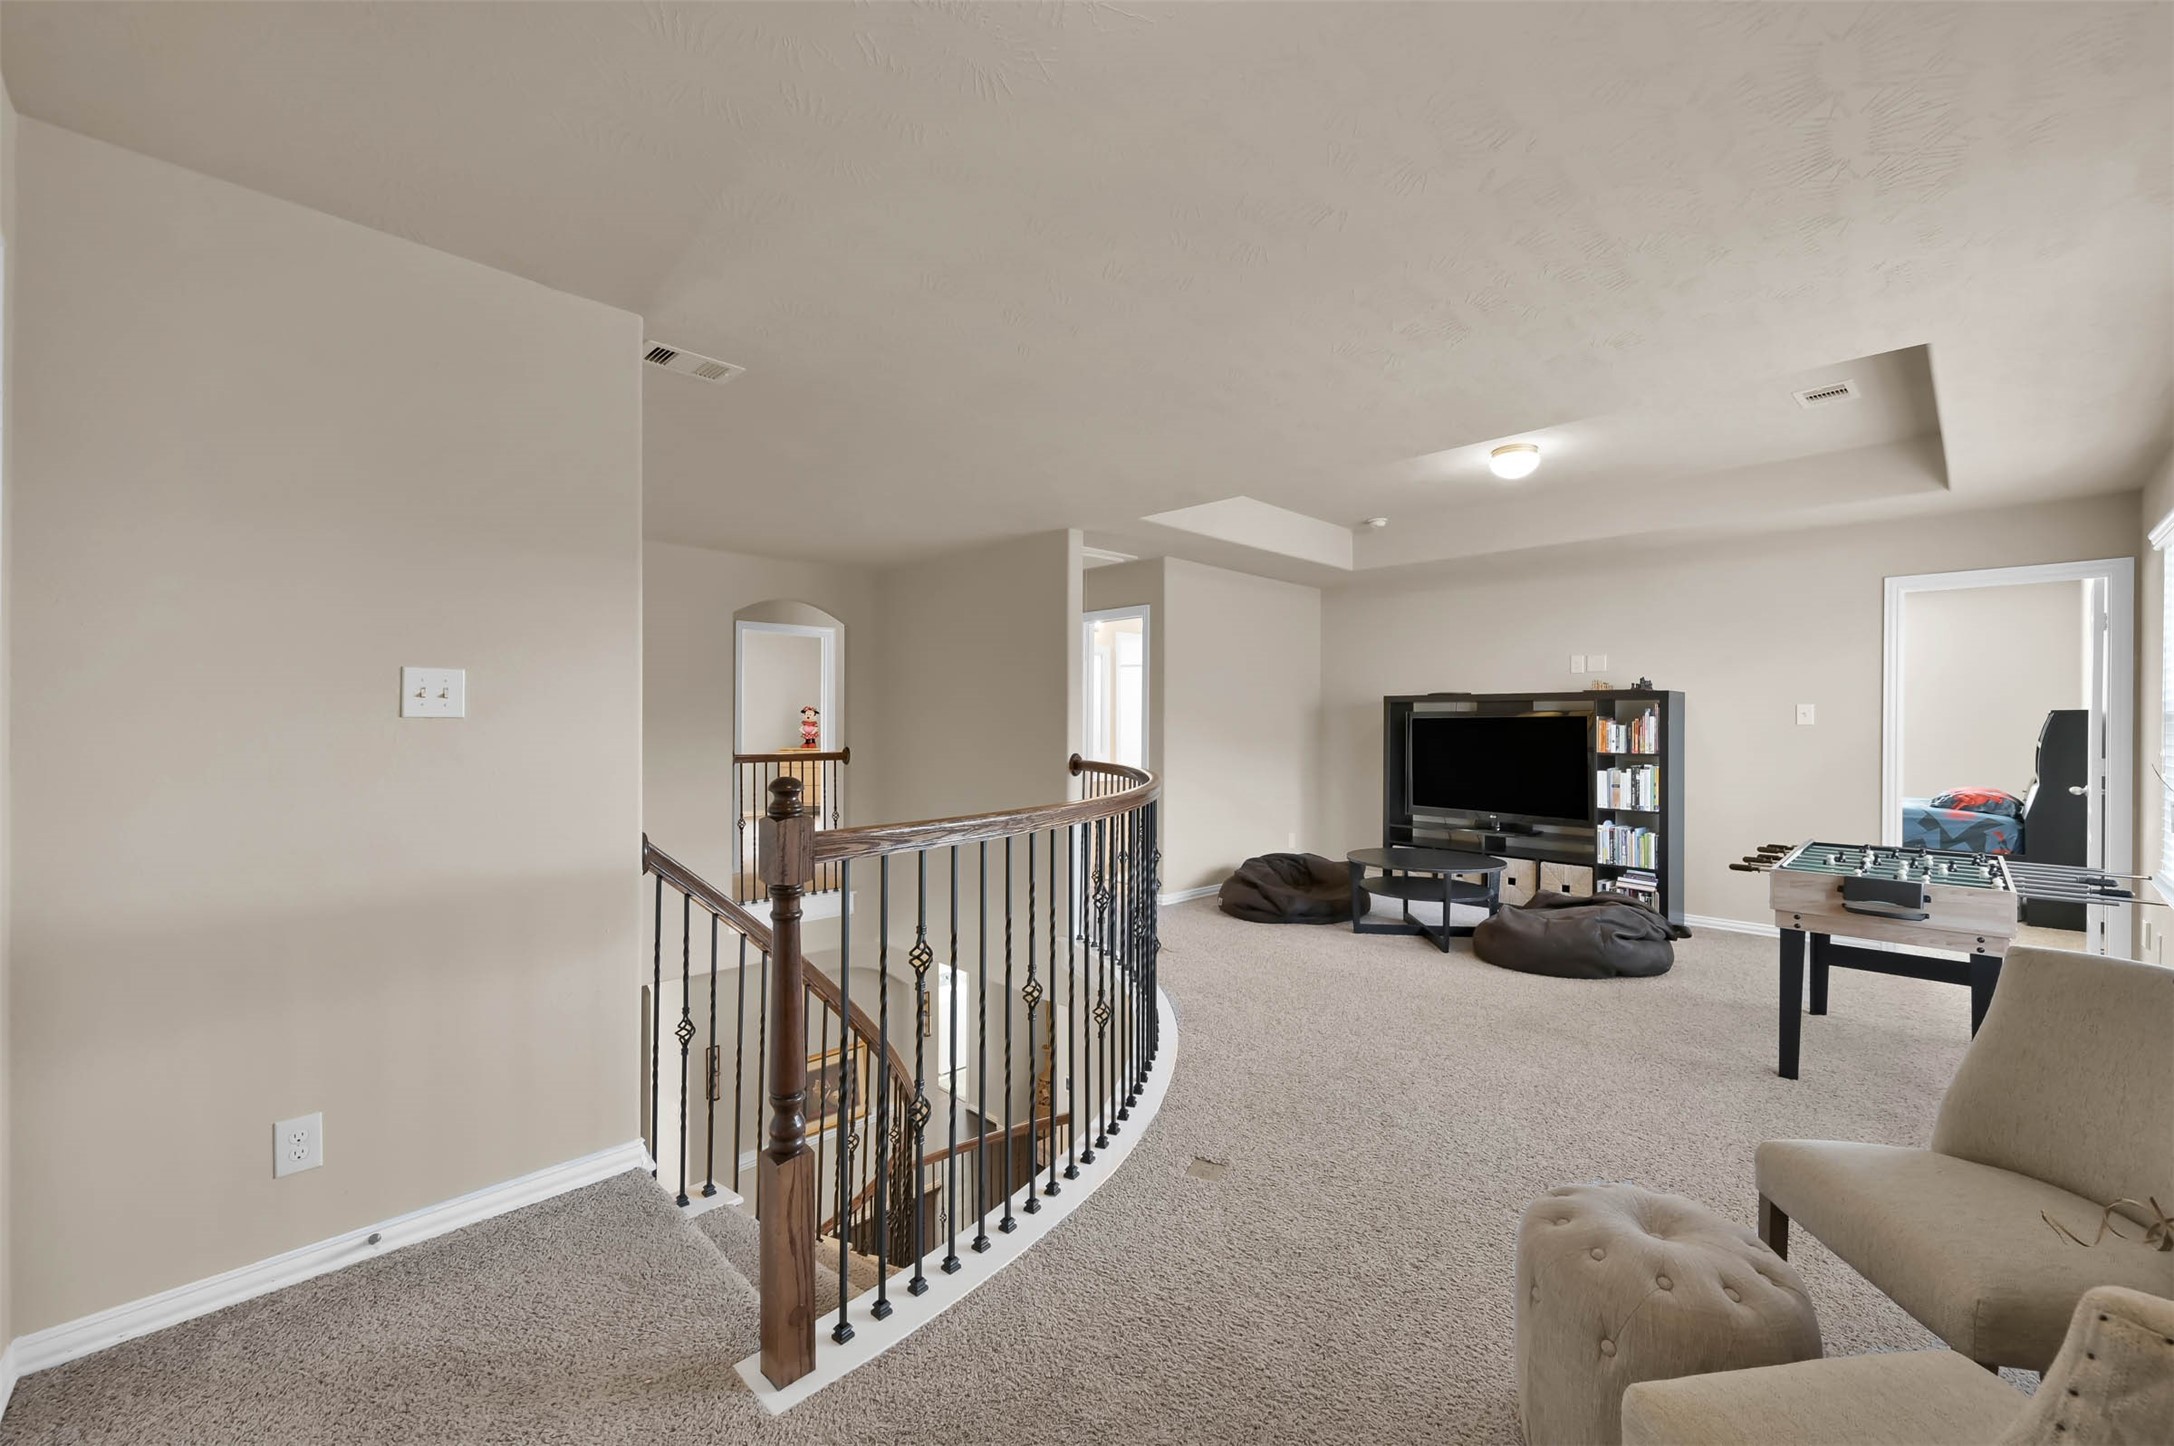 Atop the stairs is the open gameroom area central to the 3 bedrooms.